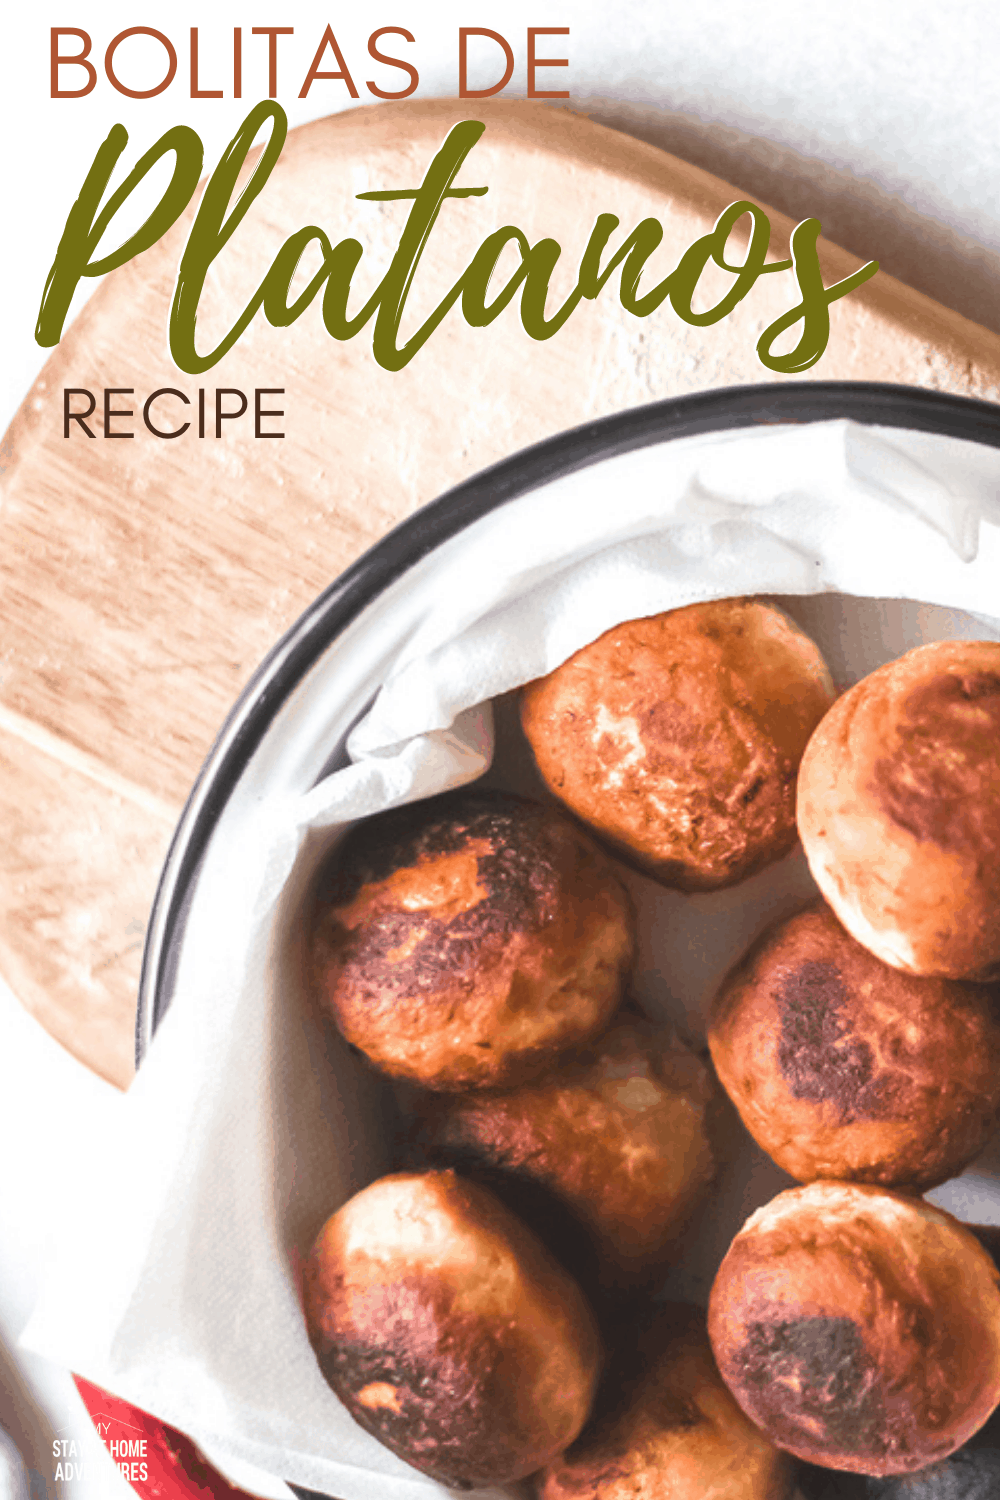 Looking for a sweet and savory snack? These bolitas de platano are quick and simple to make and so, so tasty. #plantain #platanorecipe #plantaindessert via @mystayathome